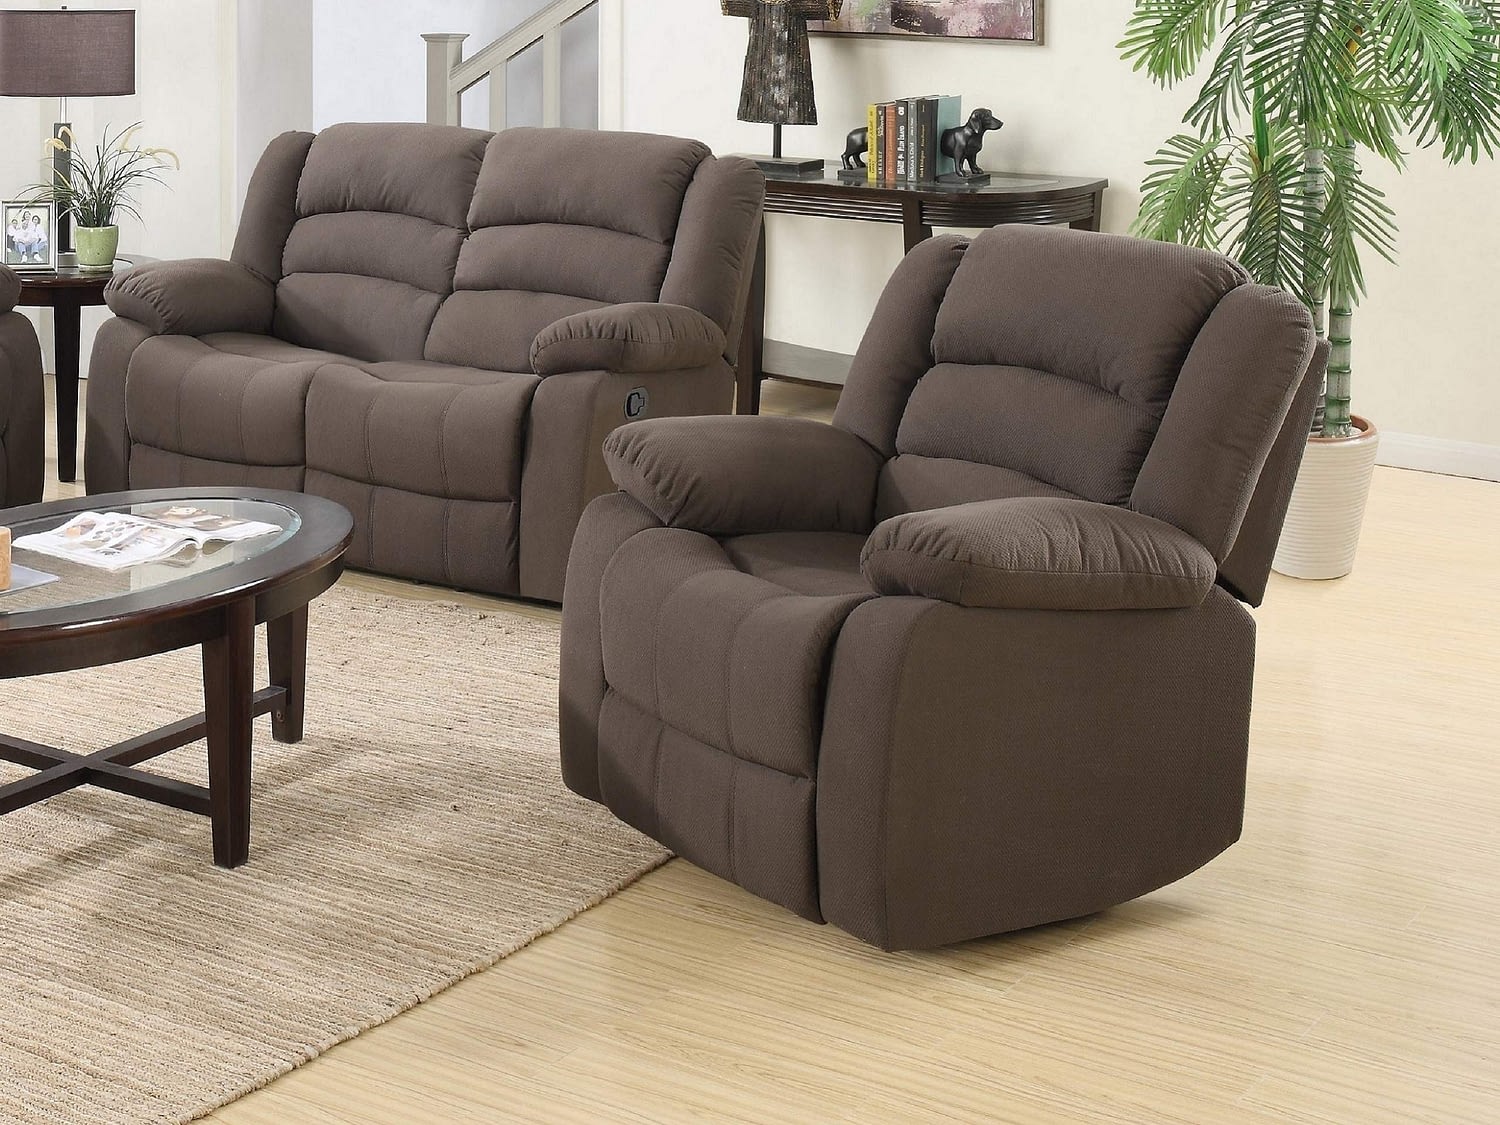 RIM Reclining Loveseat and Chair